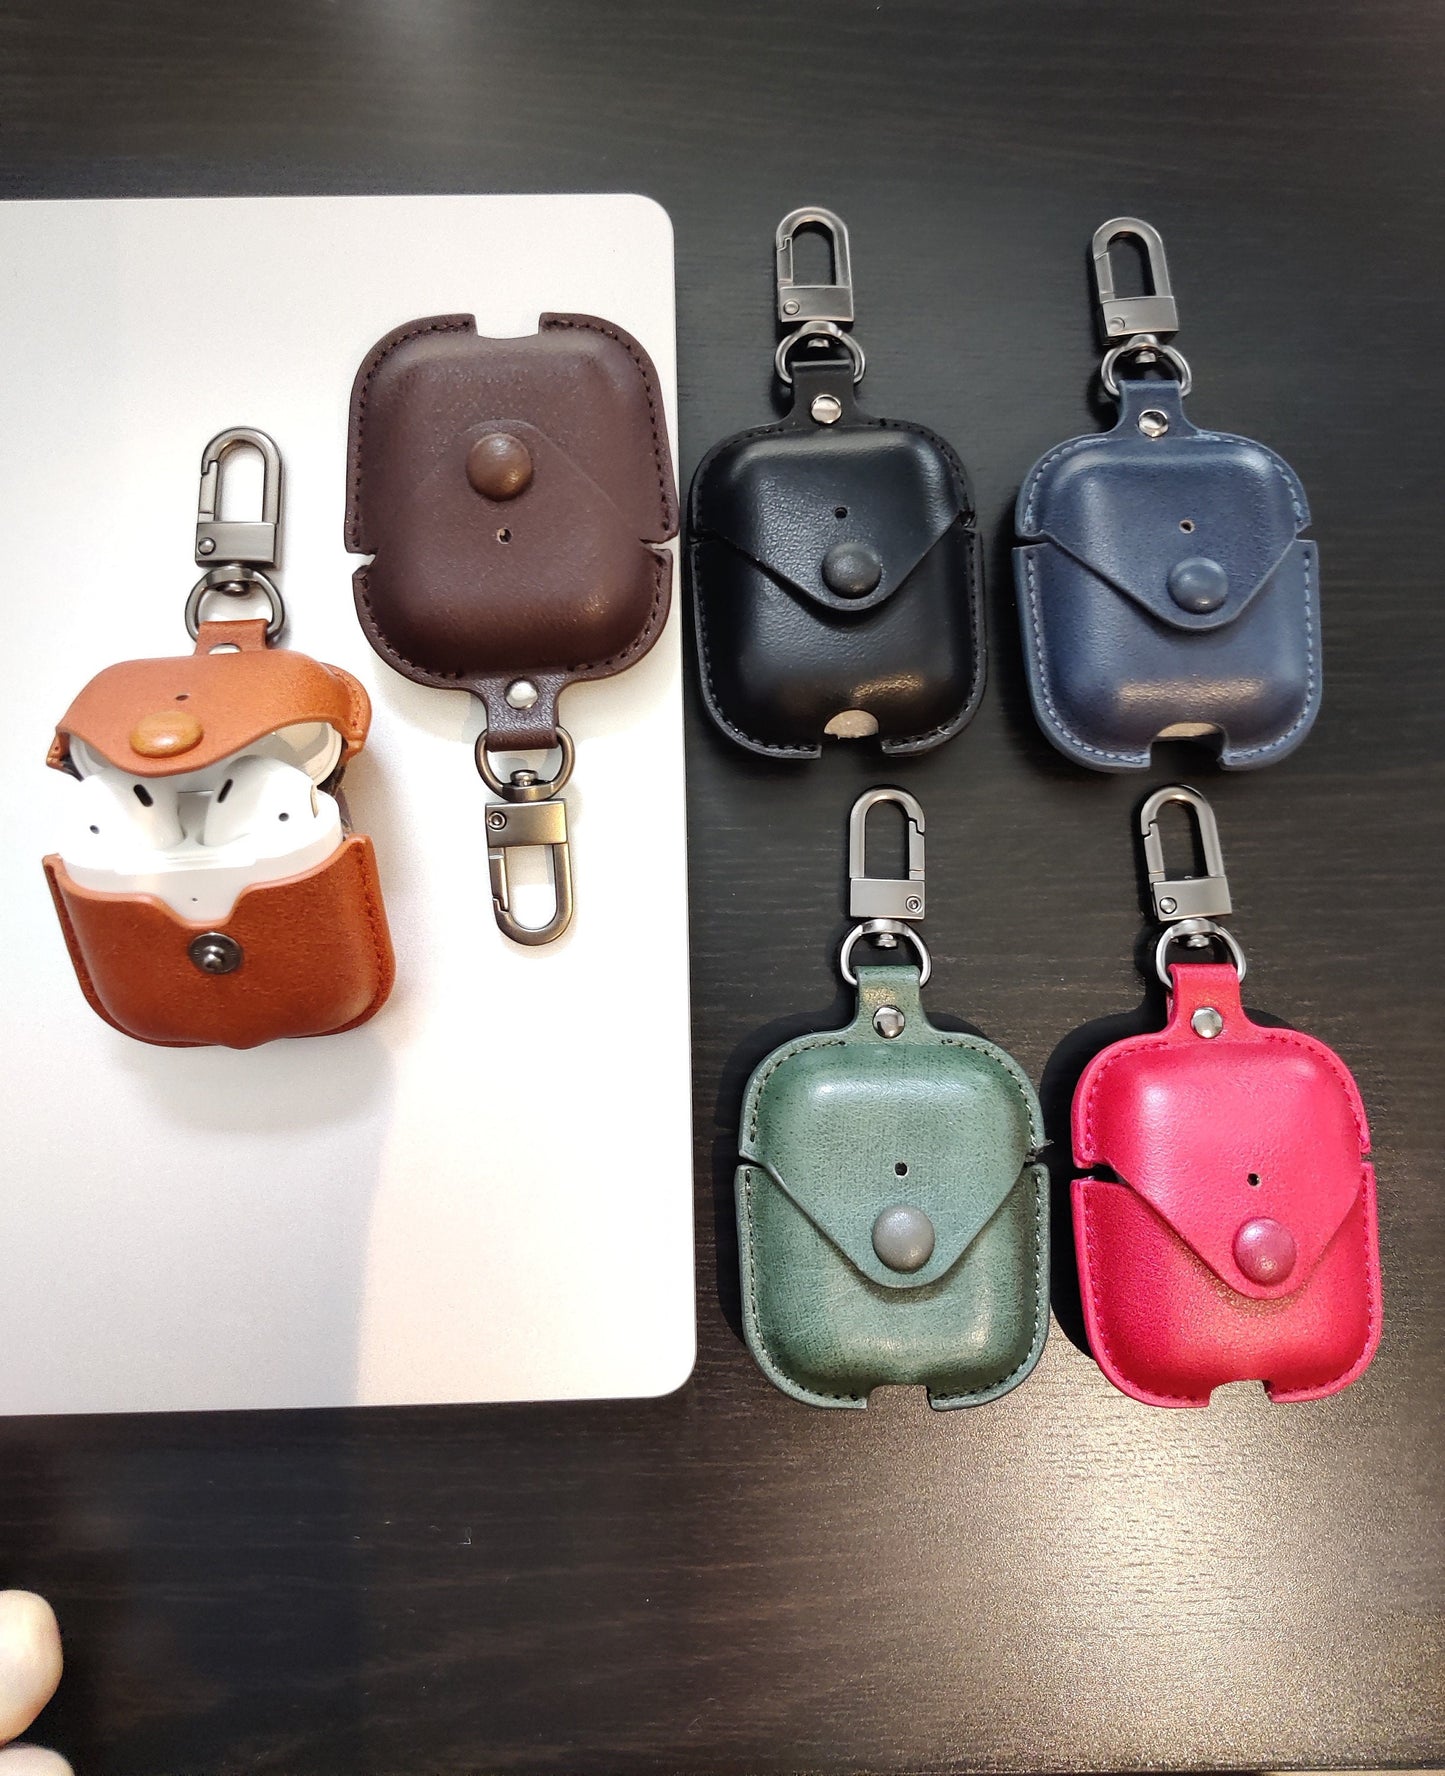 Black Pu Leather Apple Airpod Cases